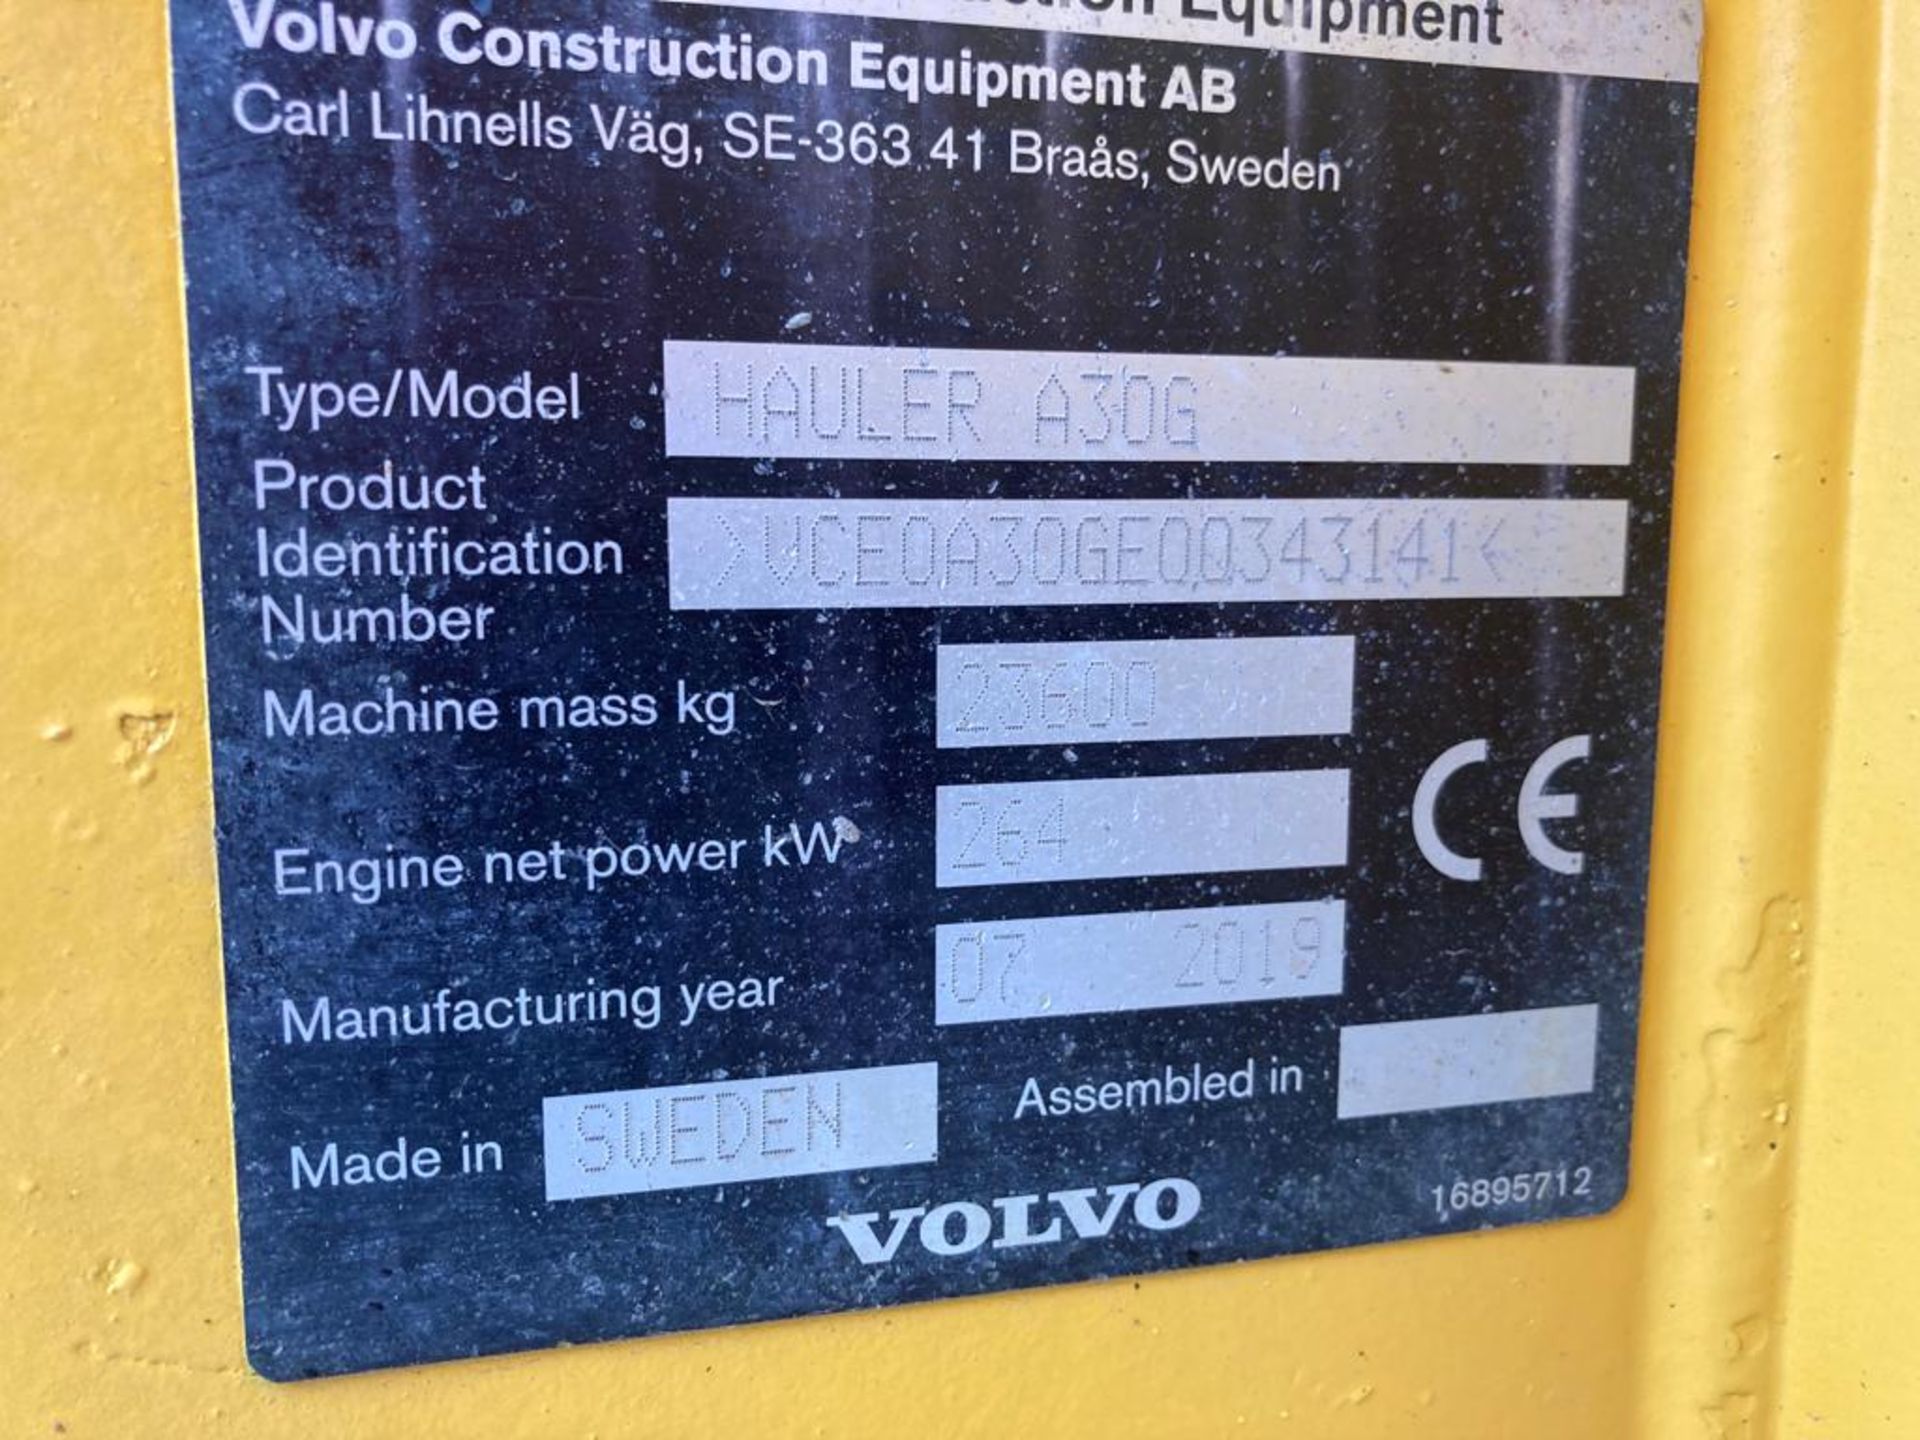 Direct from Volvo Main Dealer, 2019 (A30G#343141A) - Image 7 of 23